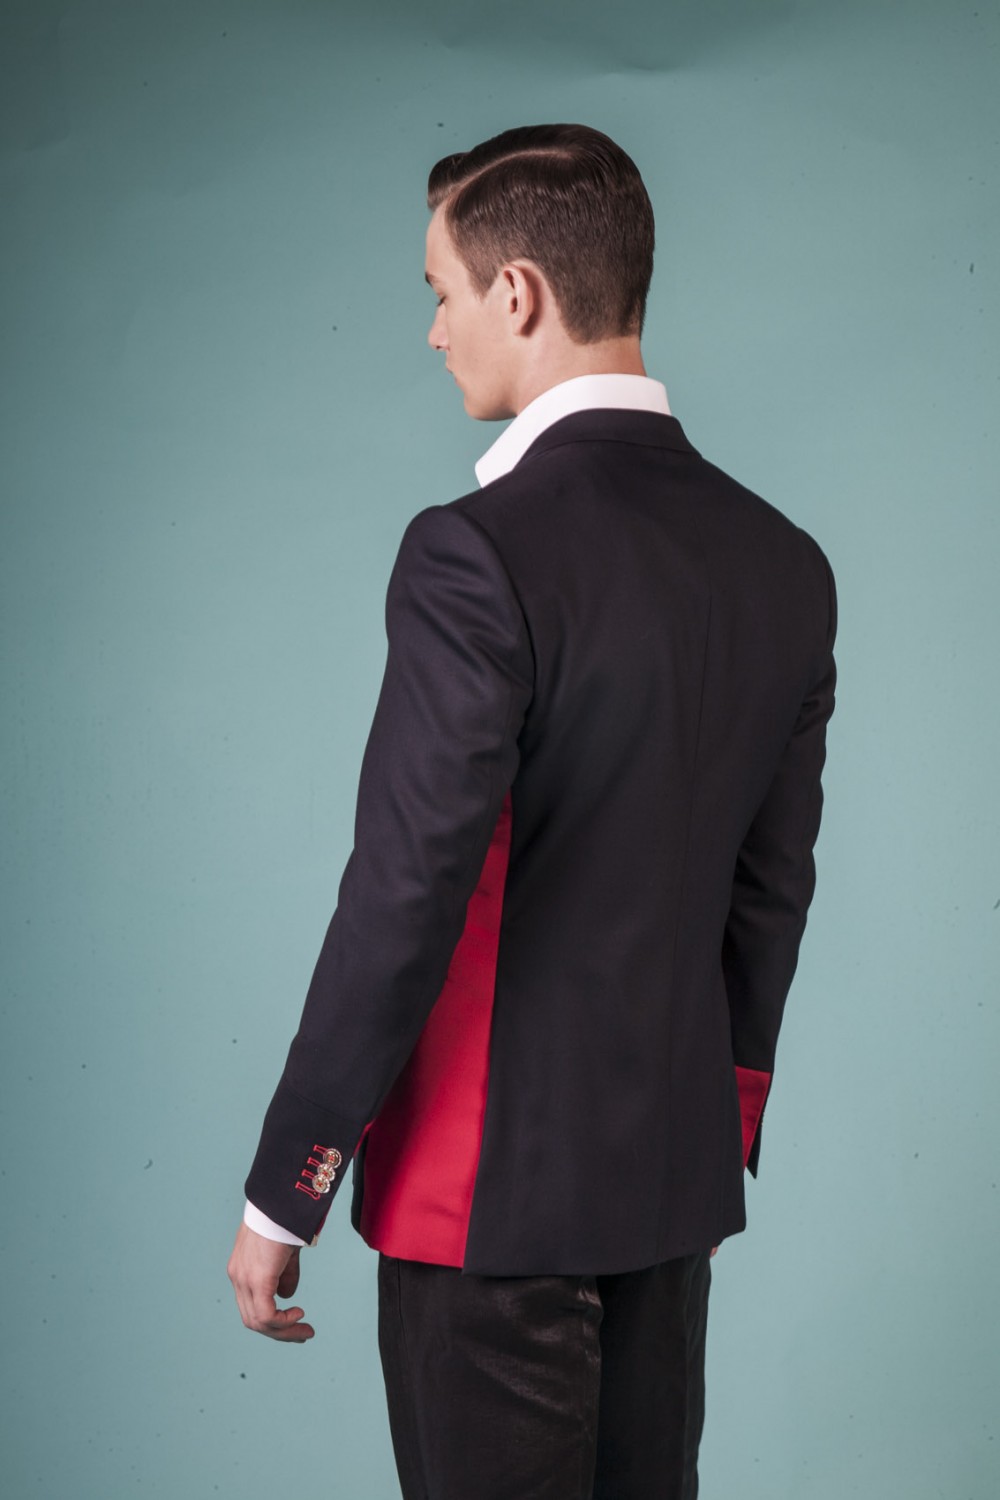 Colour: Midnight blue - Red
Fabric: Stretch wool - Silk faille
Lining: Viscose